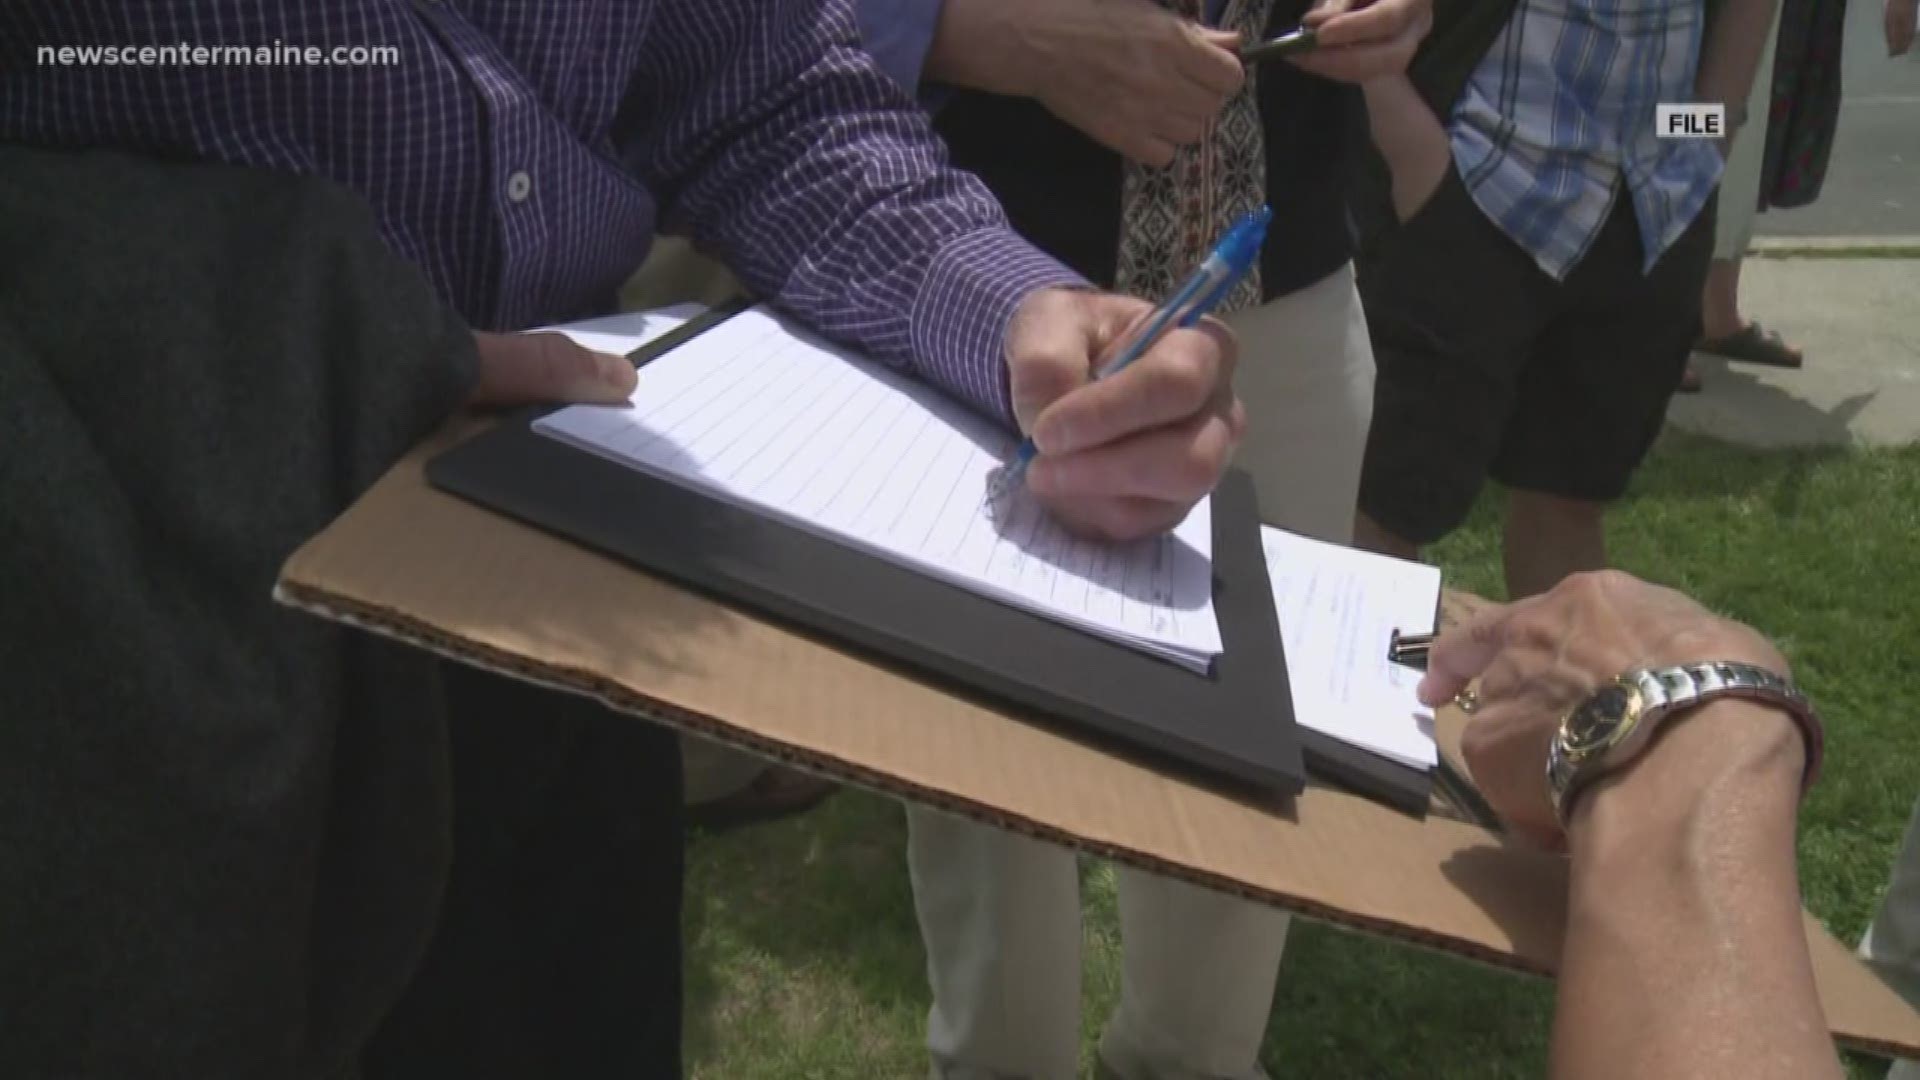 Maine has new rules for collecting petition signatures.